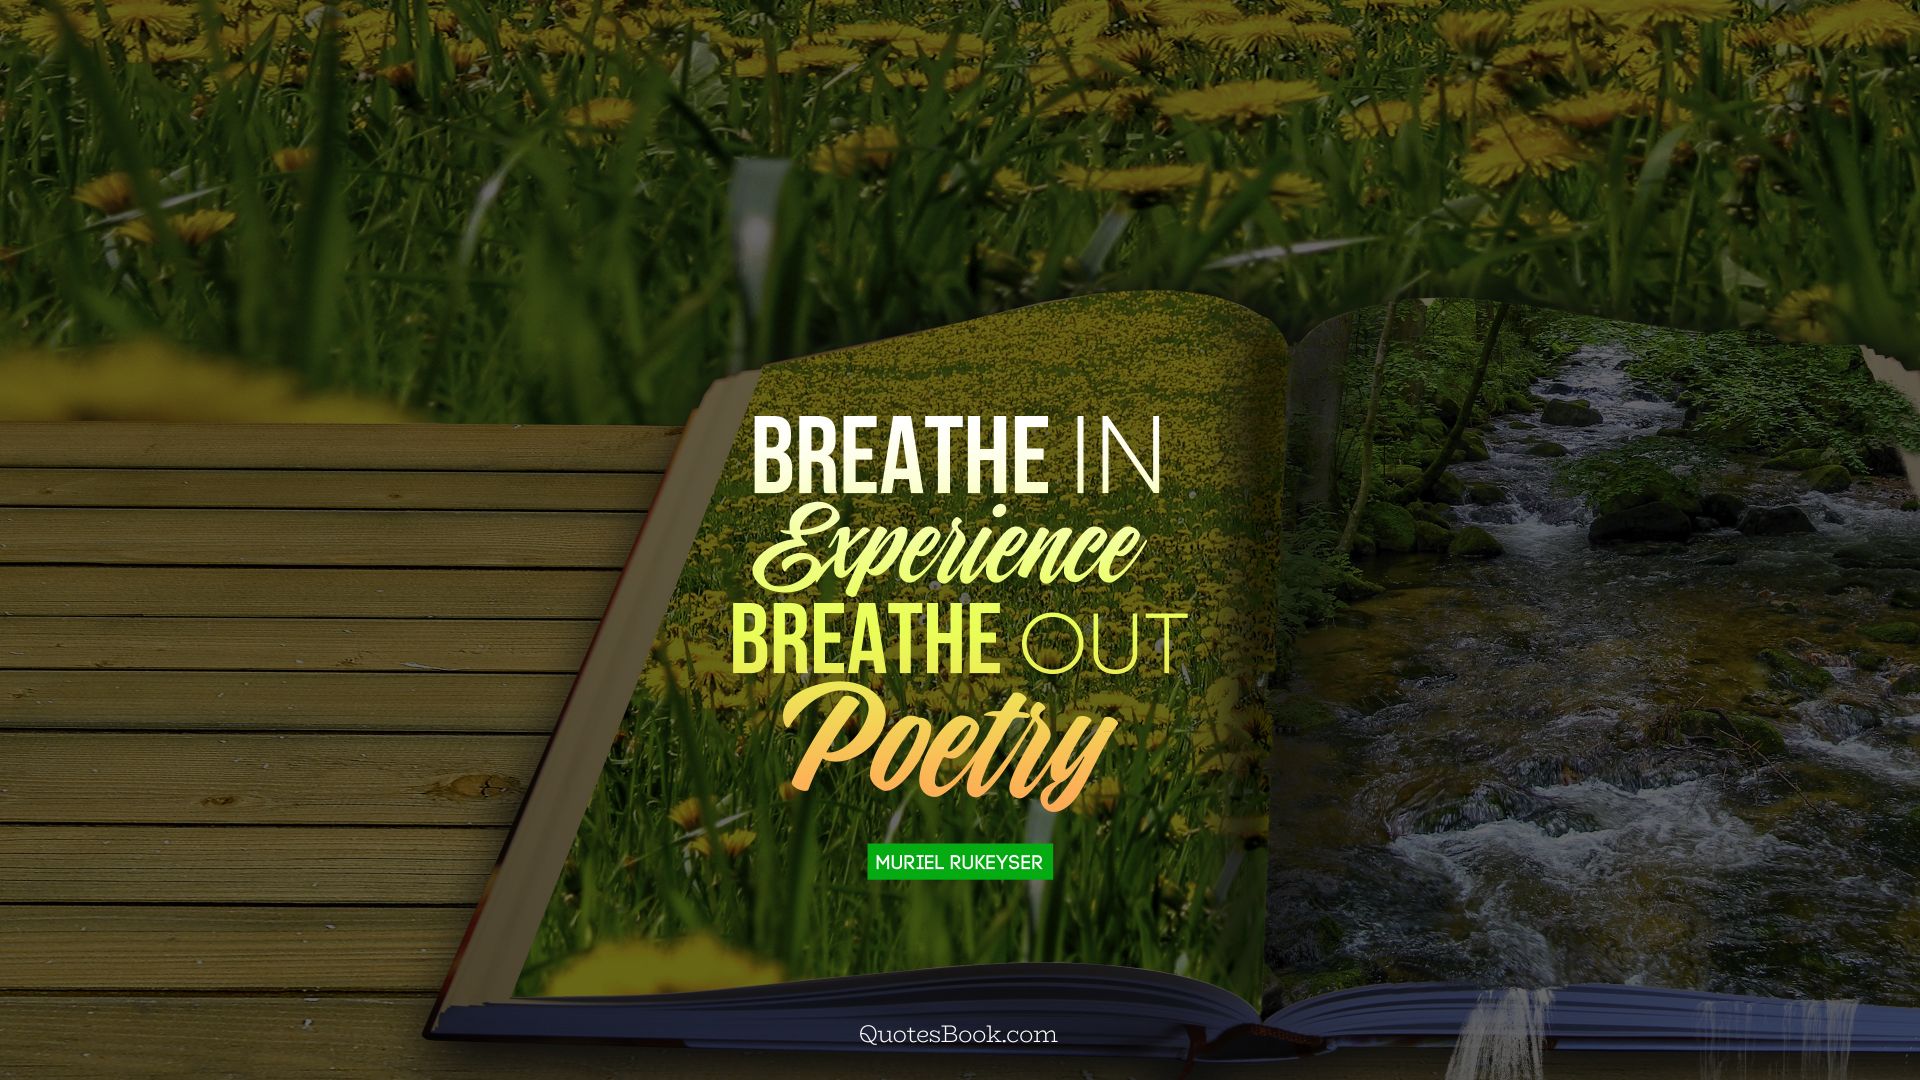 Breathe in experience breathe out poetry. - Quote by Muriel Rukeyser